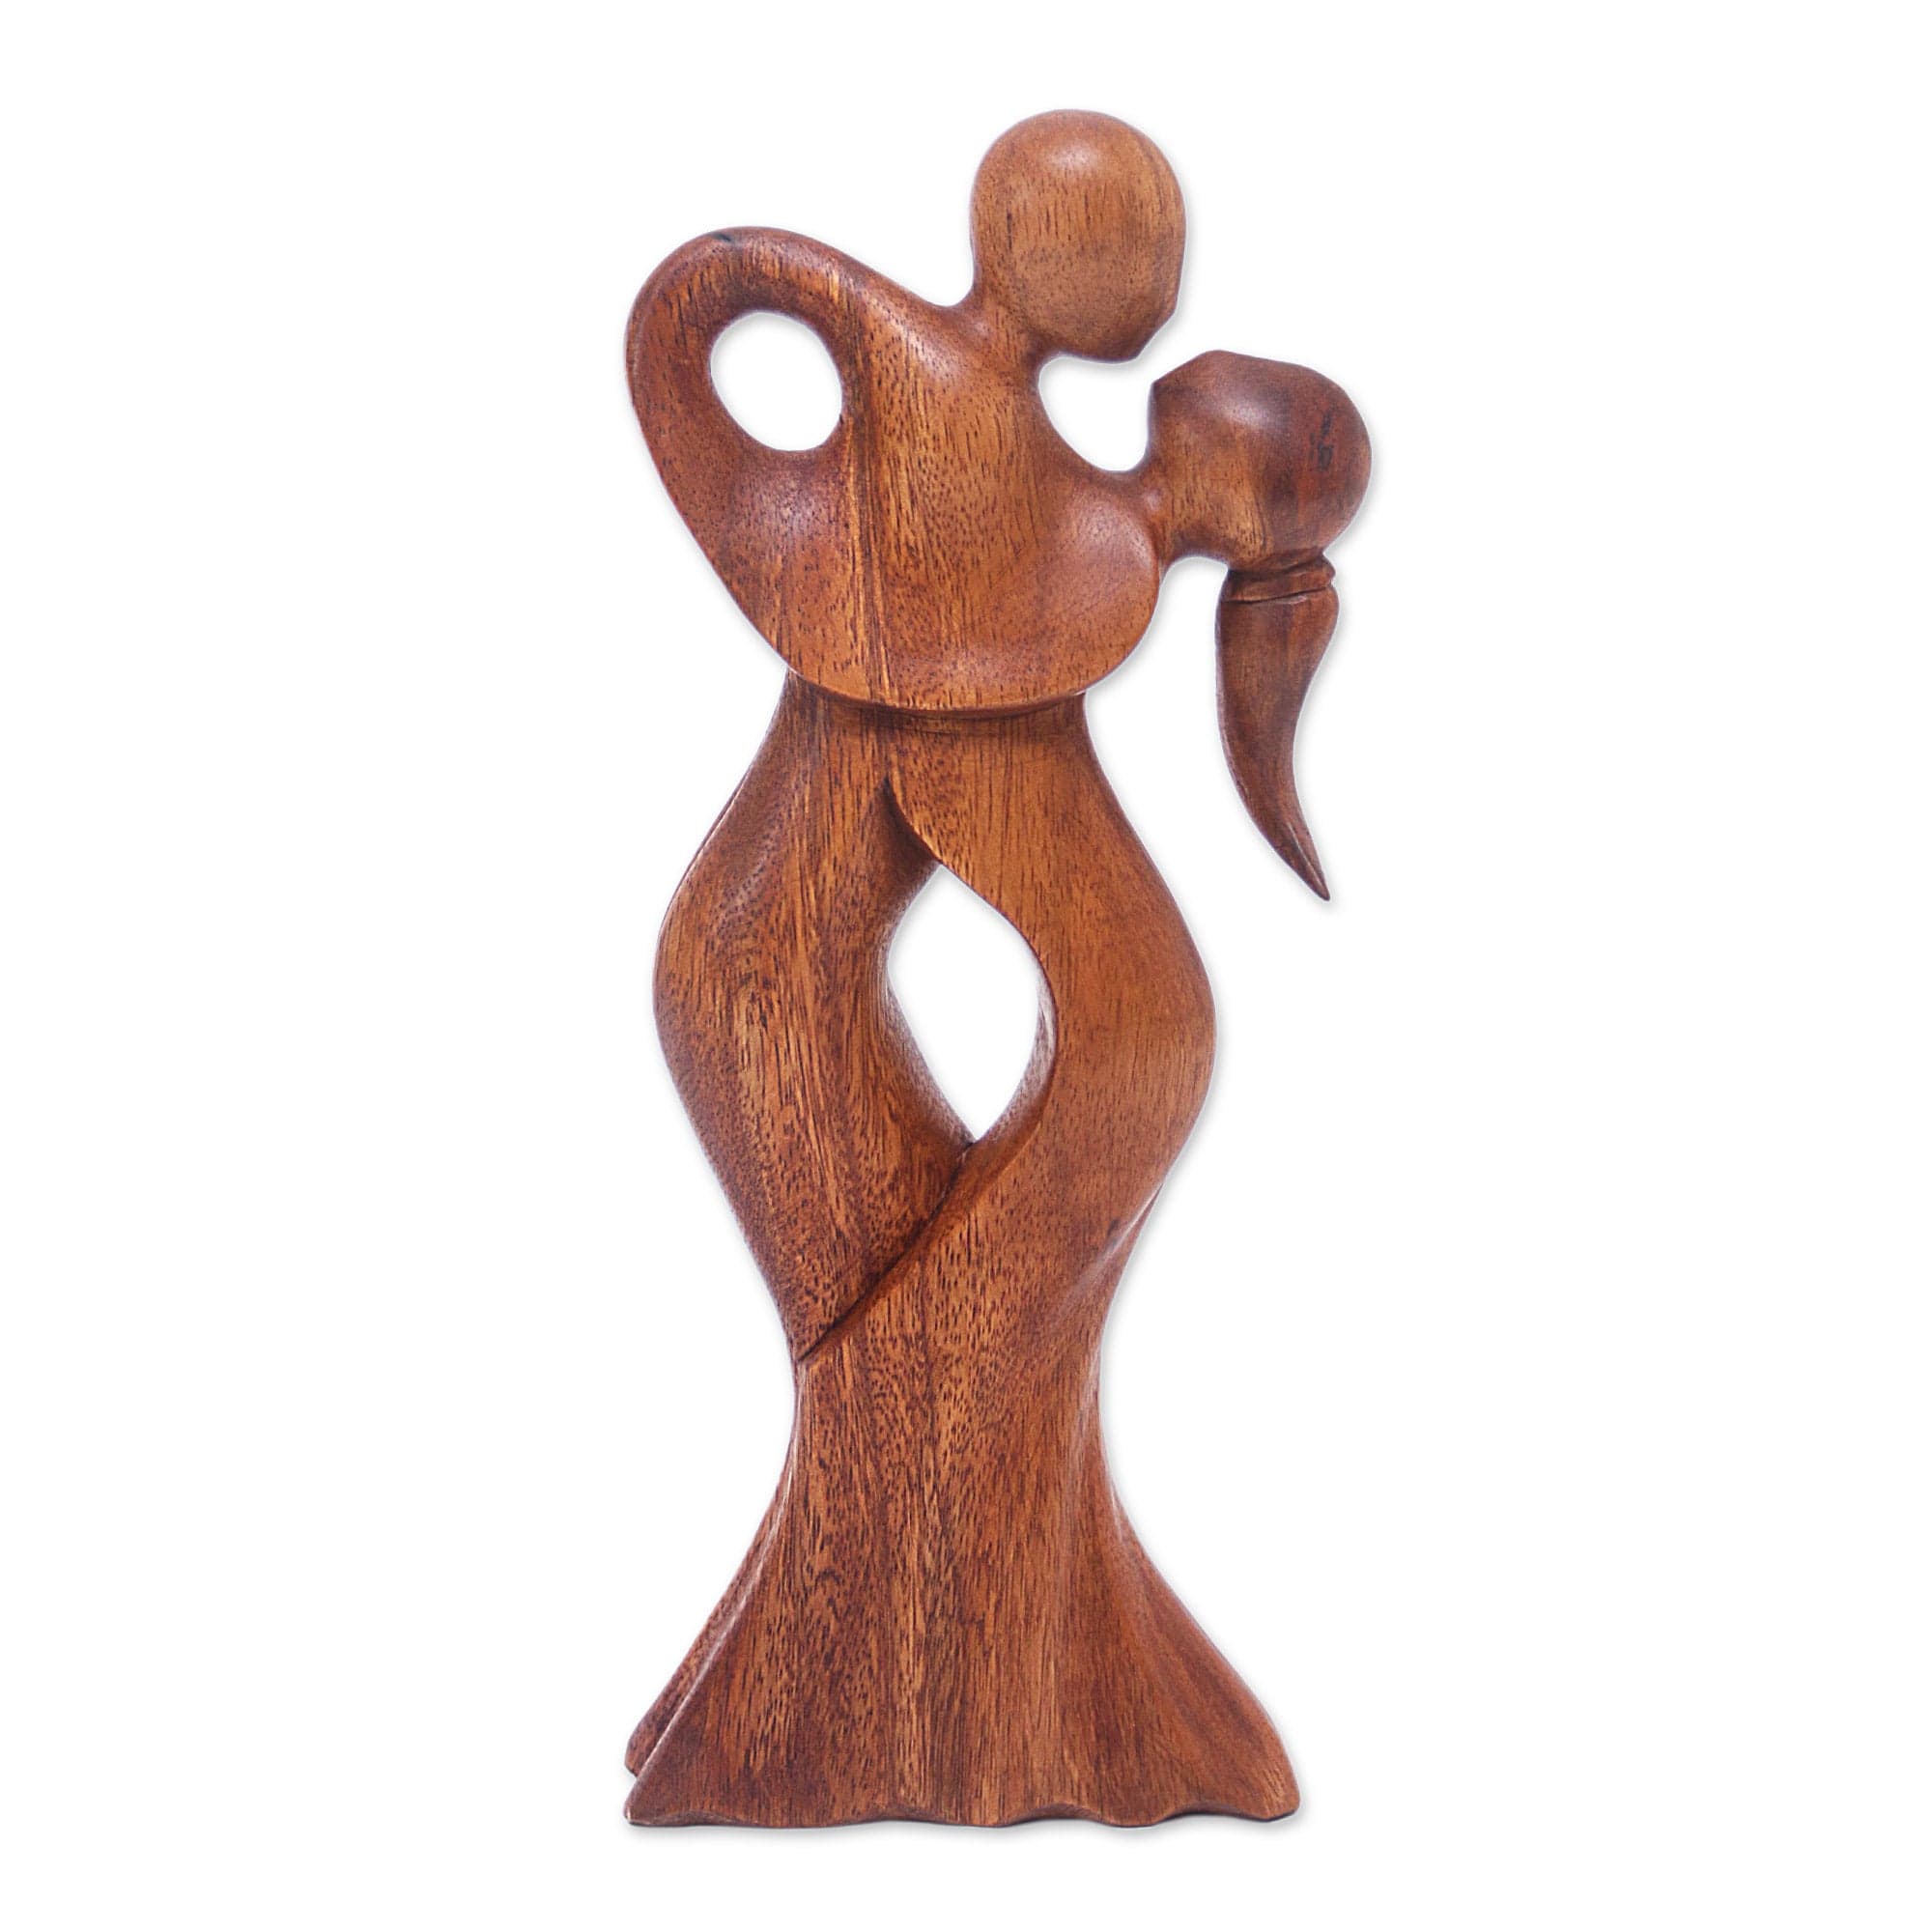 Unique Wood Sculpture from Indonesia - Family Love – GlobeIn